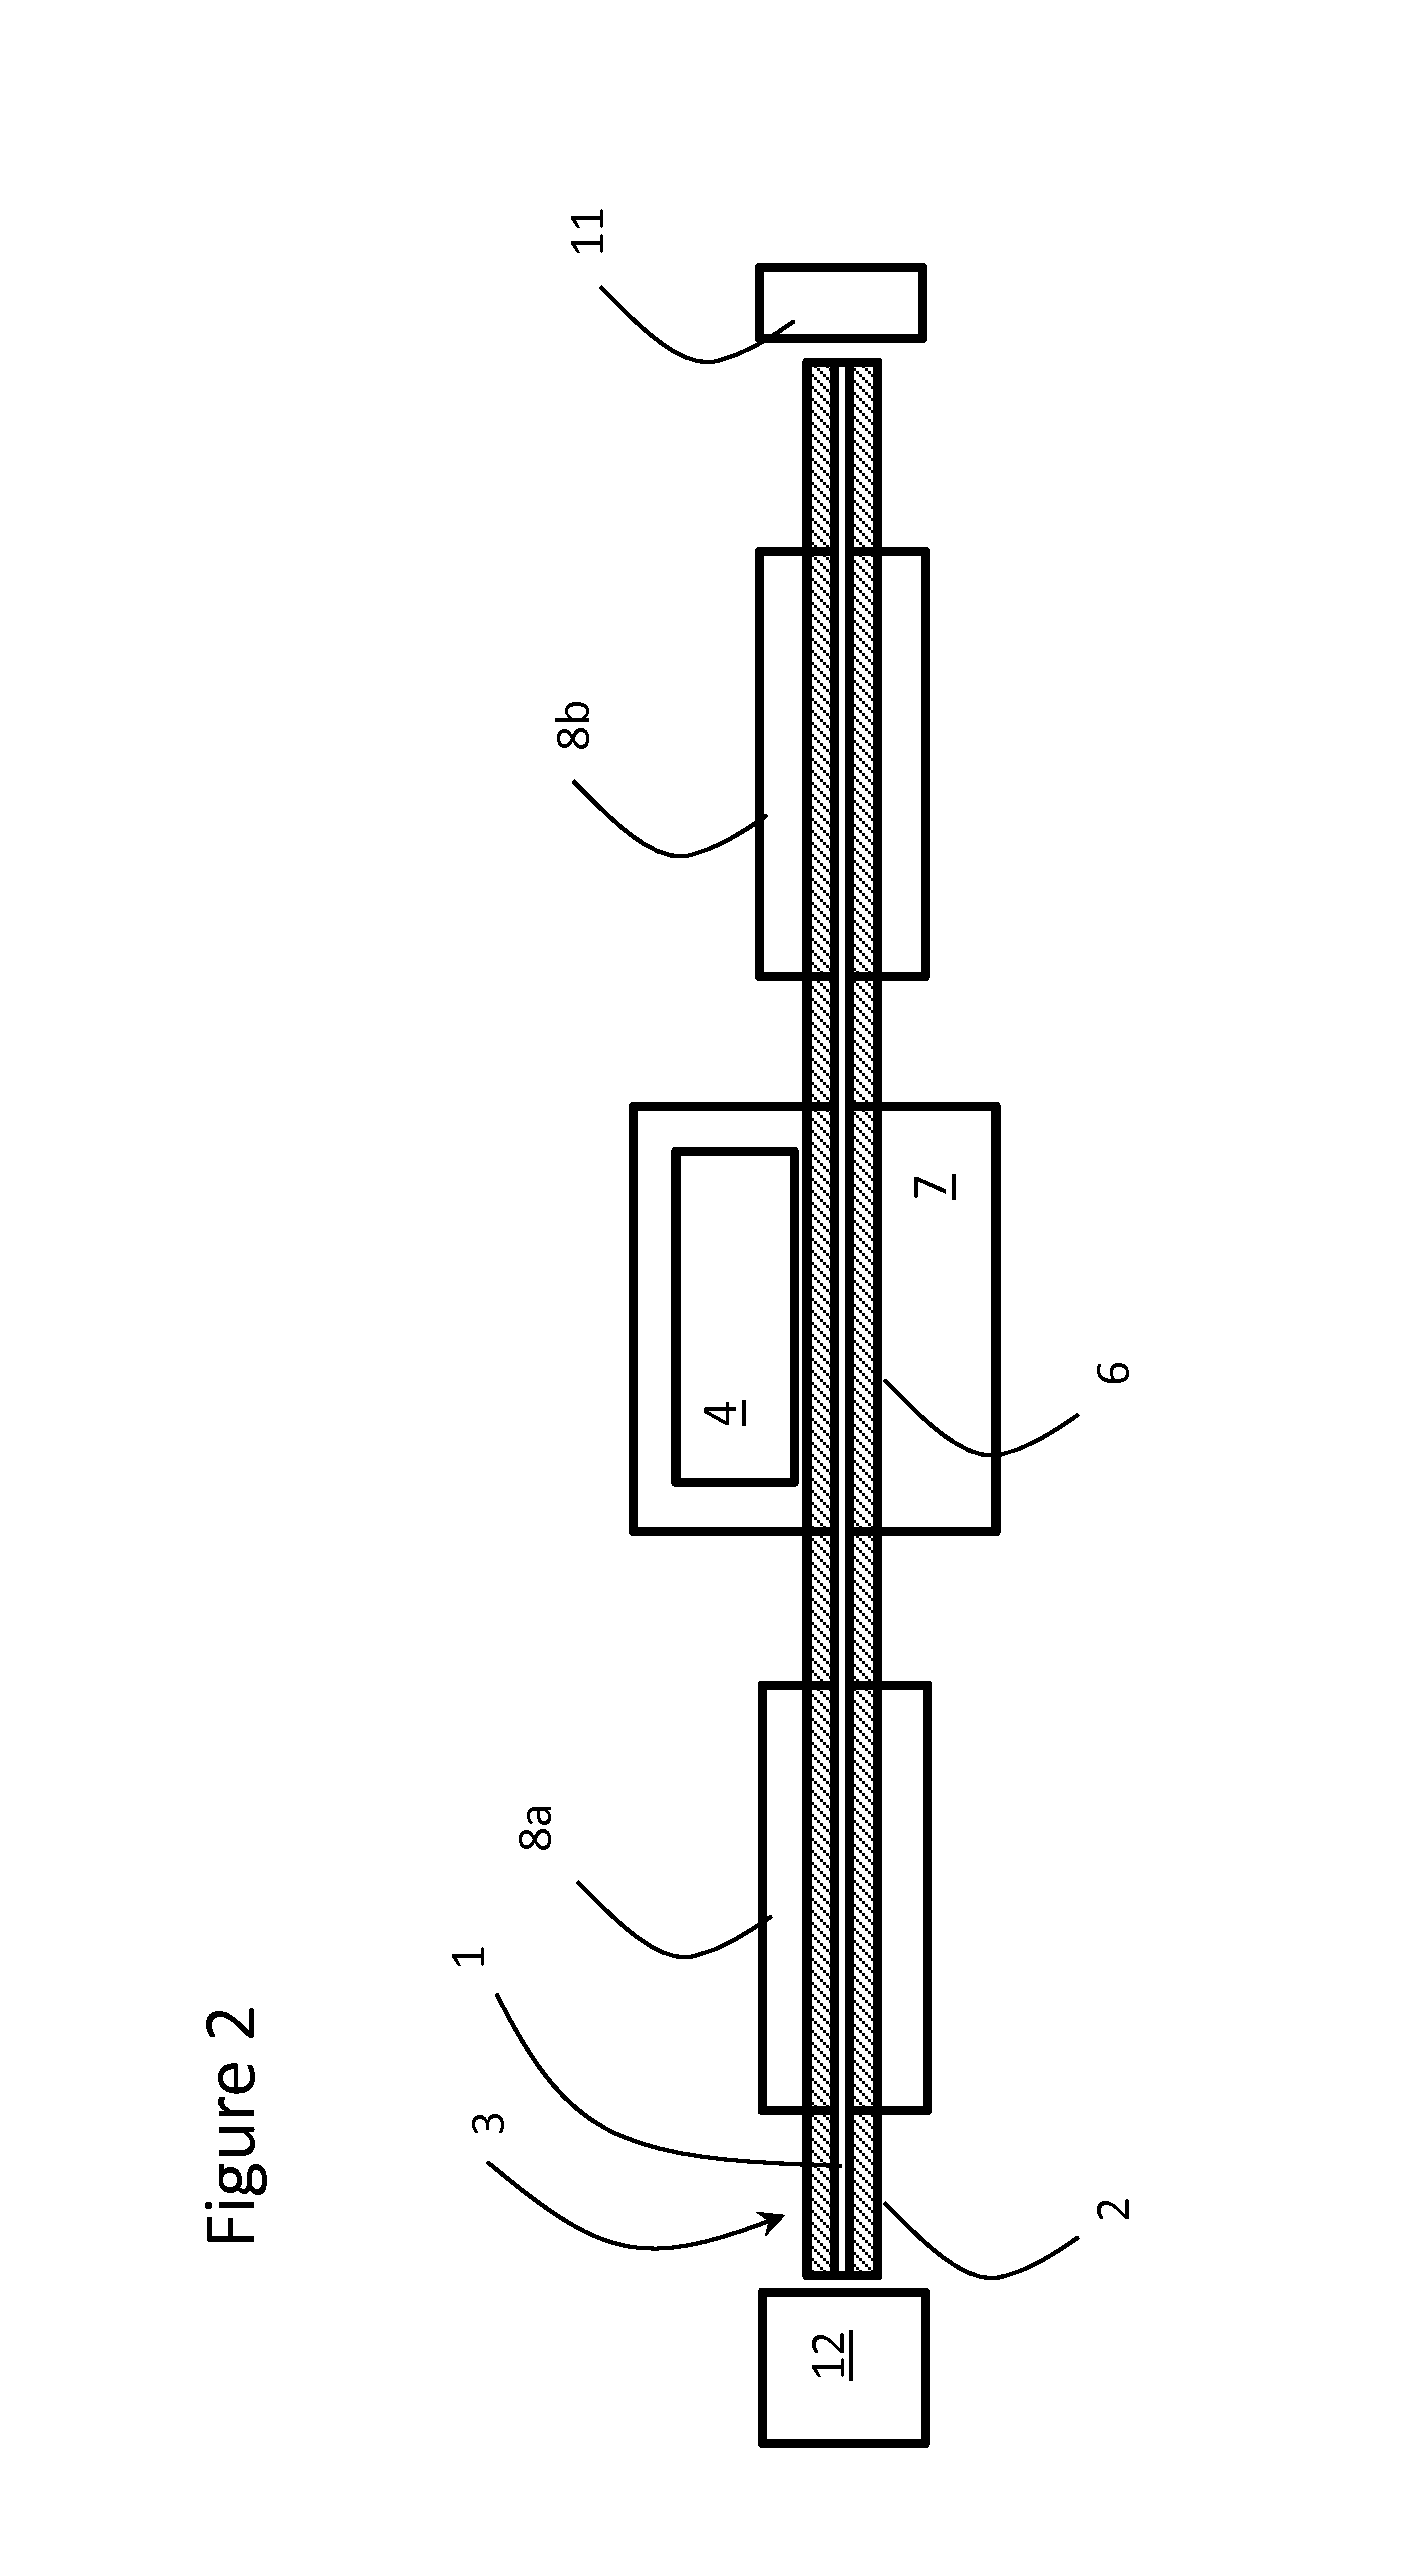 Power monitor for optical fiber using background scattering